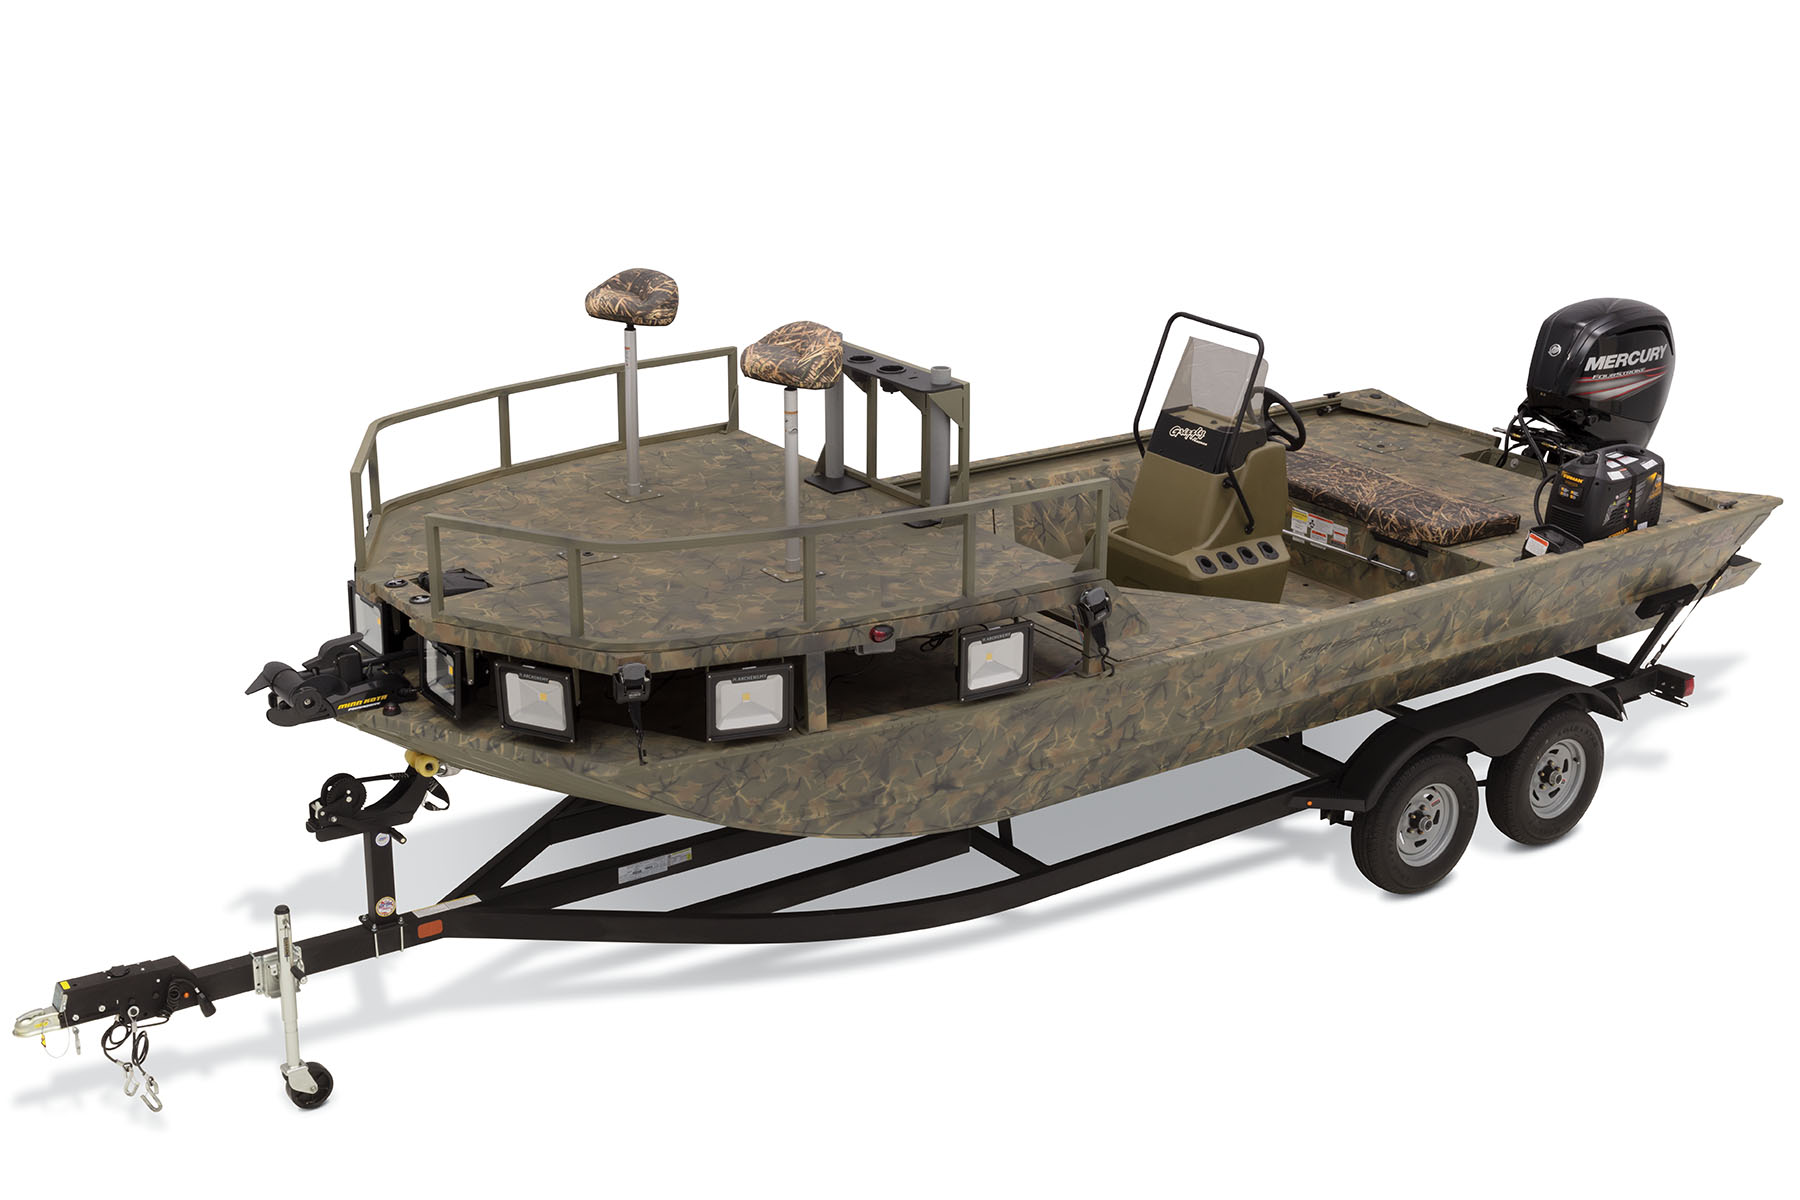 2019 GRIZZLY 2072 CC Sportsman - TRACKER Hunt and Fish Jon Boat